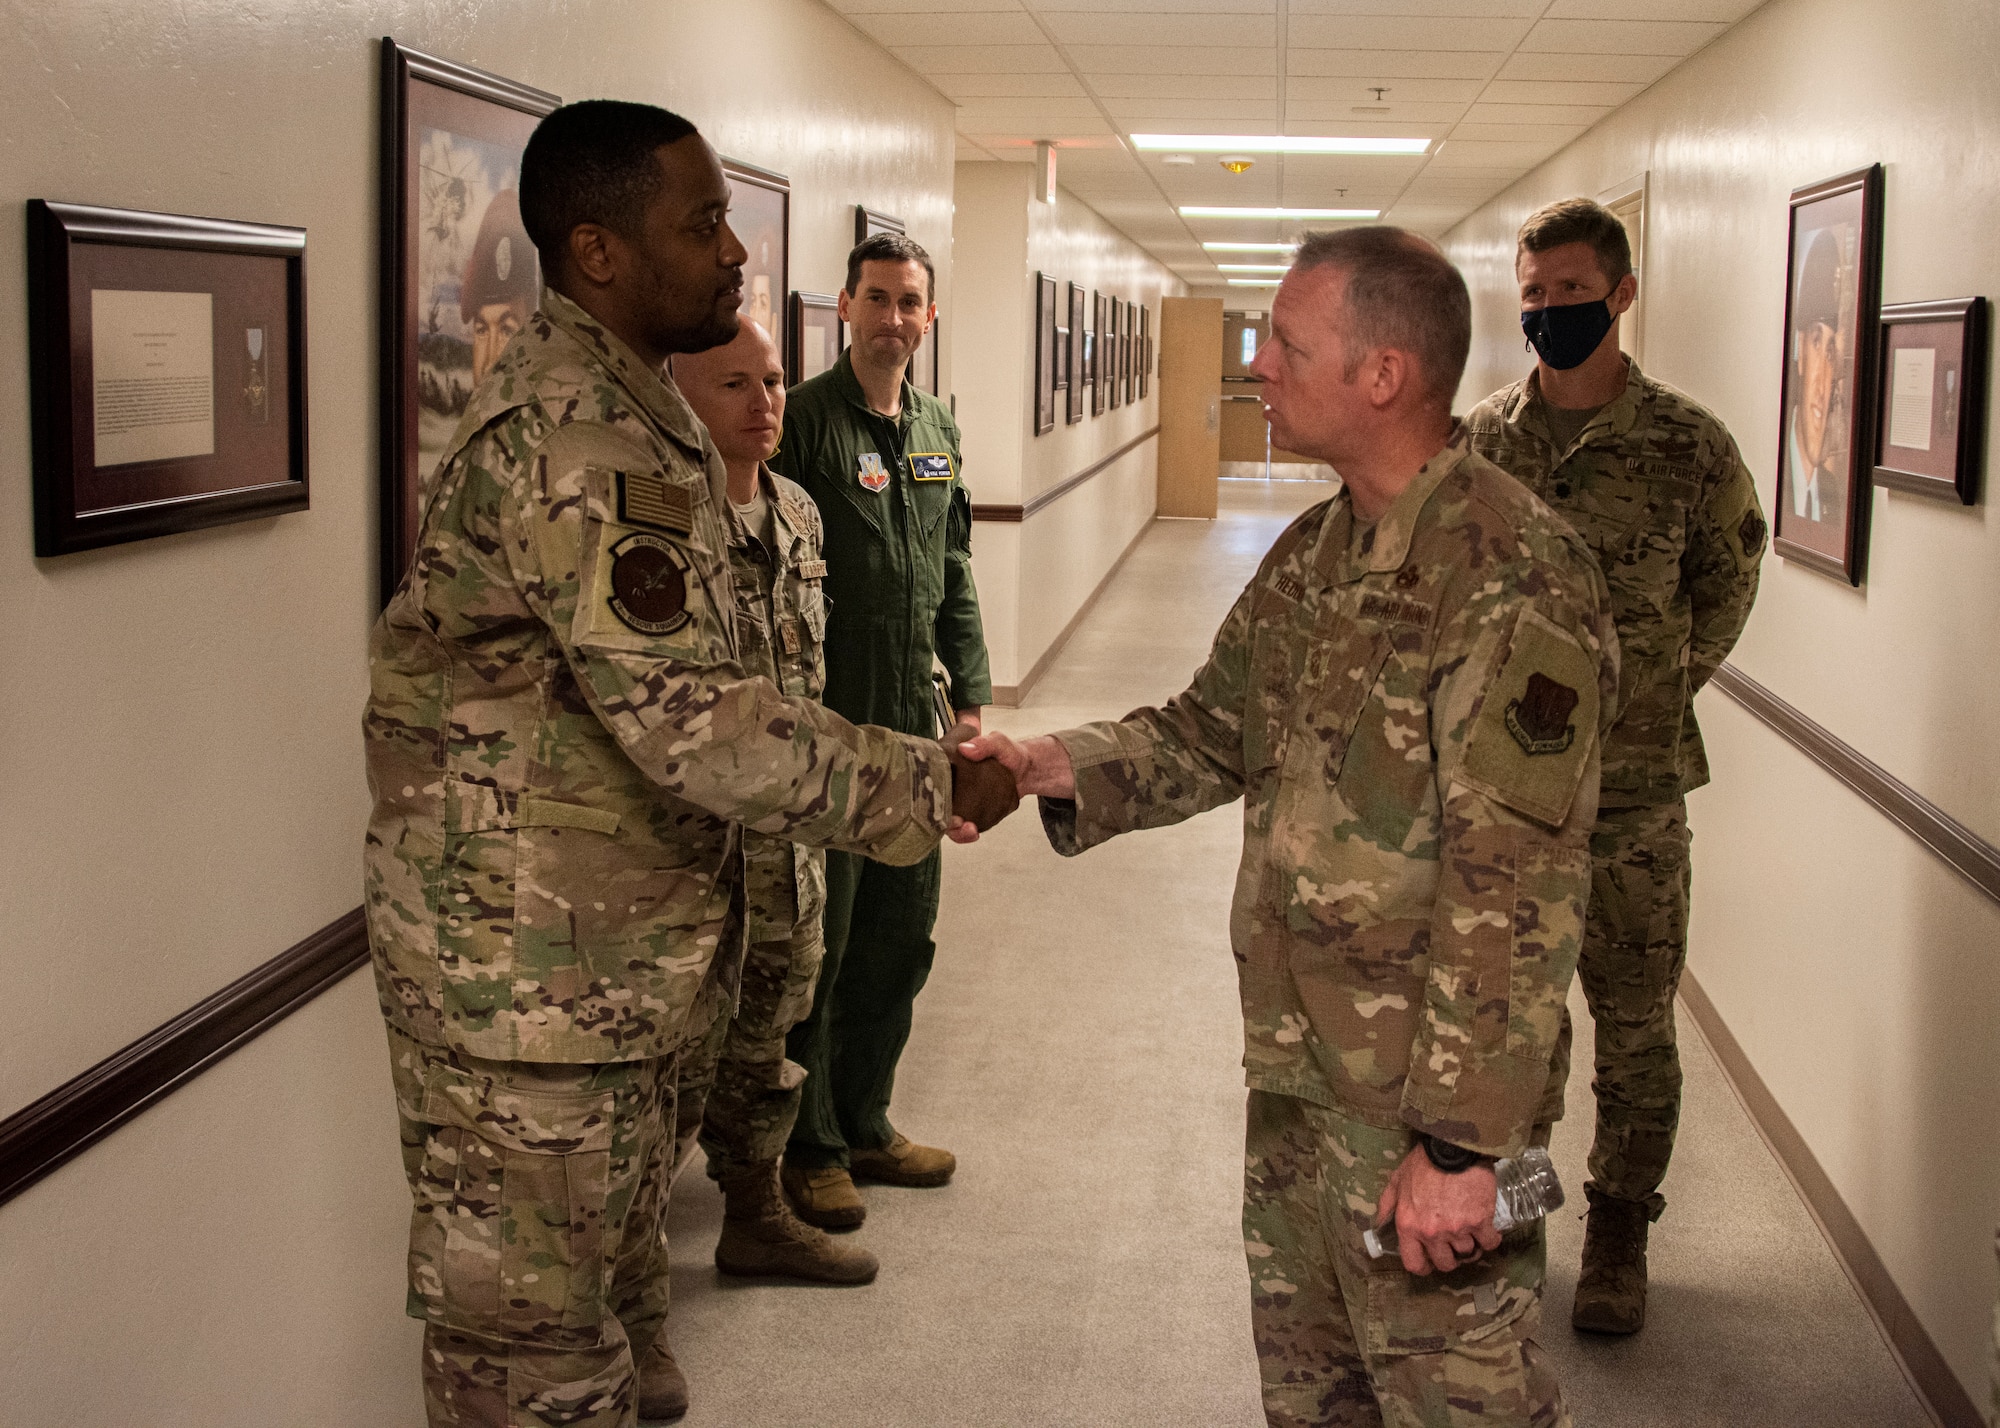 A photo of Airmen shaking hands.